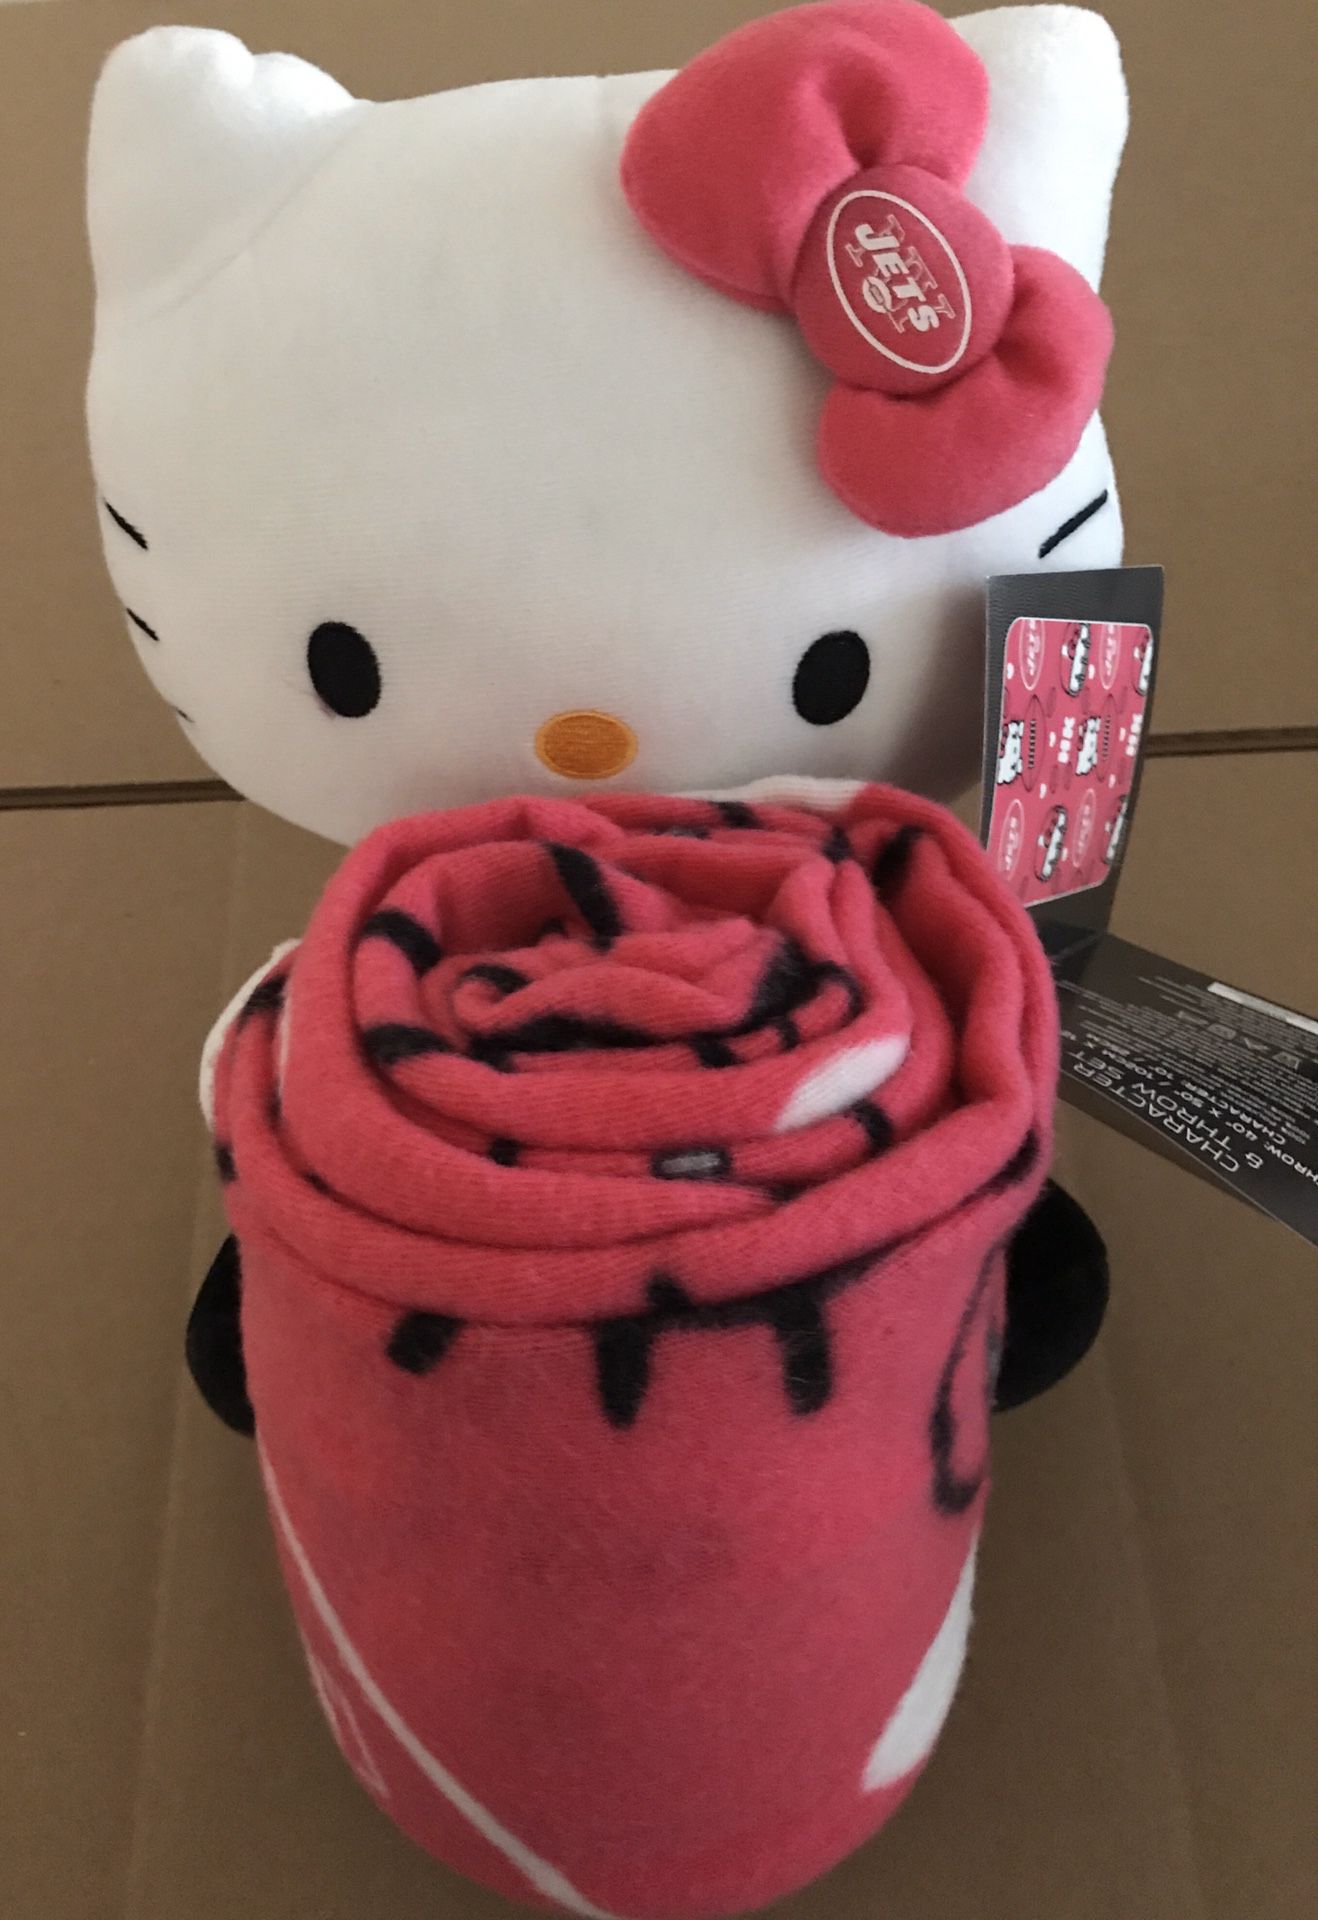 Hello Kitty NFL New York Jets throw blanket with Toy $22 or best offer